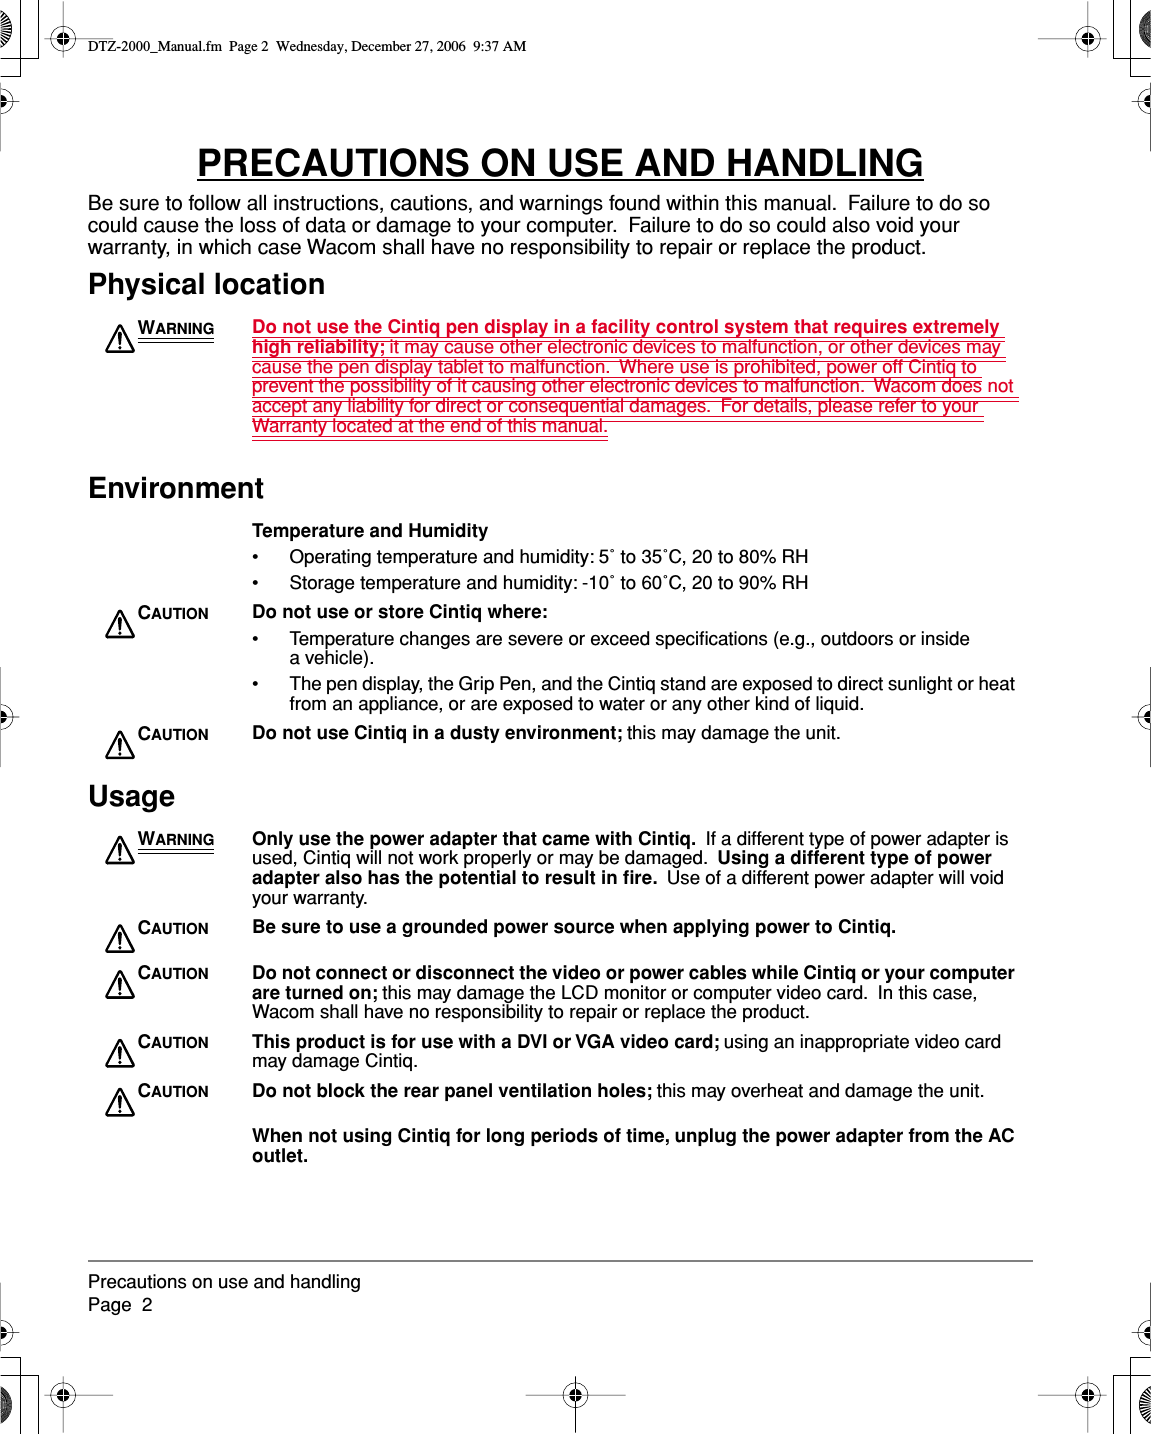  Precautions on use and handlingPage  2 PRECAUTIONS ON USE AND HANDLING Be sure to follow all instructions, cautions, and warnings found within this manual.  Failure to do so could cause the loss of data or damage to your computer.  Failure to do so could also void your warranty, in which case Wacom shall have no responsibility to repair or replace the product. Physical locationEnvironmentUsage W ARNING Do not use the Cintiq pen display in a facility control system that requires extremely high reliability;  it may cause other electronic devices to malfunction, or other devices may cause the pen display tablet to malfunction.  Where use is prohibited, power off Cintiq to prevent the possibility of it causing other electronic devices to malfunction.  Wacom does not accept any liability for direct or consequential damages.  For details, please refer to your Warranty located at the end of this manual. Temperature and Humidity • Operating temperature and humidity: 5˚ to 35˚C, 20 to 80% RH• Storage temperature and humidity: -10˚ to 60˚C, 20 to 90% RH C AUTION Do not use or store Cintiq where: • Temperature changes are severe or exceed speciﬁcations (e.g., outdoors or inside a vehicle).• The pen display, the Grip Pen, and the Cintiq stand are exposed to direct sunlight or heat from an appliance, or are exposed to water or any other kind of liquid. C AUTION Do not use Cintiq in a dusty environment;  this may damage the unit. W ARNING Only use the power adapter that came with Cintiq.   If a different type of power adapter is used, Cintiq will not work properly or may be damaged.   Using a different type of power adapter also has the potential to result in ﬁre.   Use of a different power adapter will void your warranty. C AUTION Be sure to use a grounded power source when applying power to Cintiq.C AUTION Do not connect or disconnect the video or power cables while Cintiq or your computer are turned on;  this may damage the LCD monitor or computer video card.  In this case, Wacom shall have no responsibility to repair or replace the product. C AUTION This product is for use with a DVI or VGA video card;  using an inappropriate video card may damage Cintiq. C AUTION Do not block the rear panel ventilation holes;  this may overheat and damage the unit. When not using Cintiq for long periods of time, unplug the power adapter from the AC outlet. DTZ-2000_Manual.fm  Page 2  Wednesday, December 27, 2006  9:37 AM